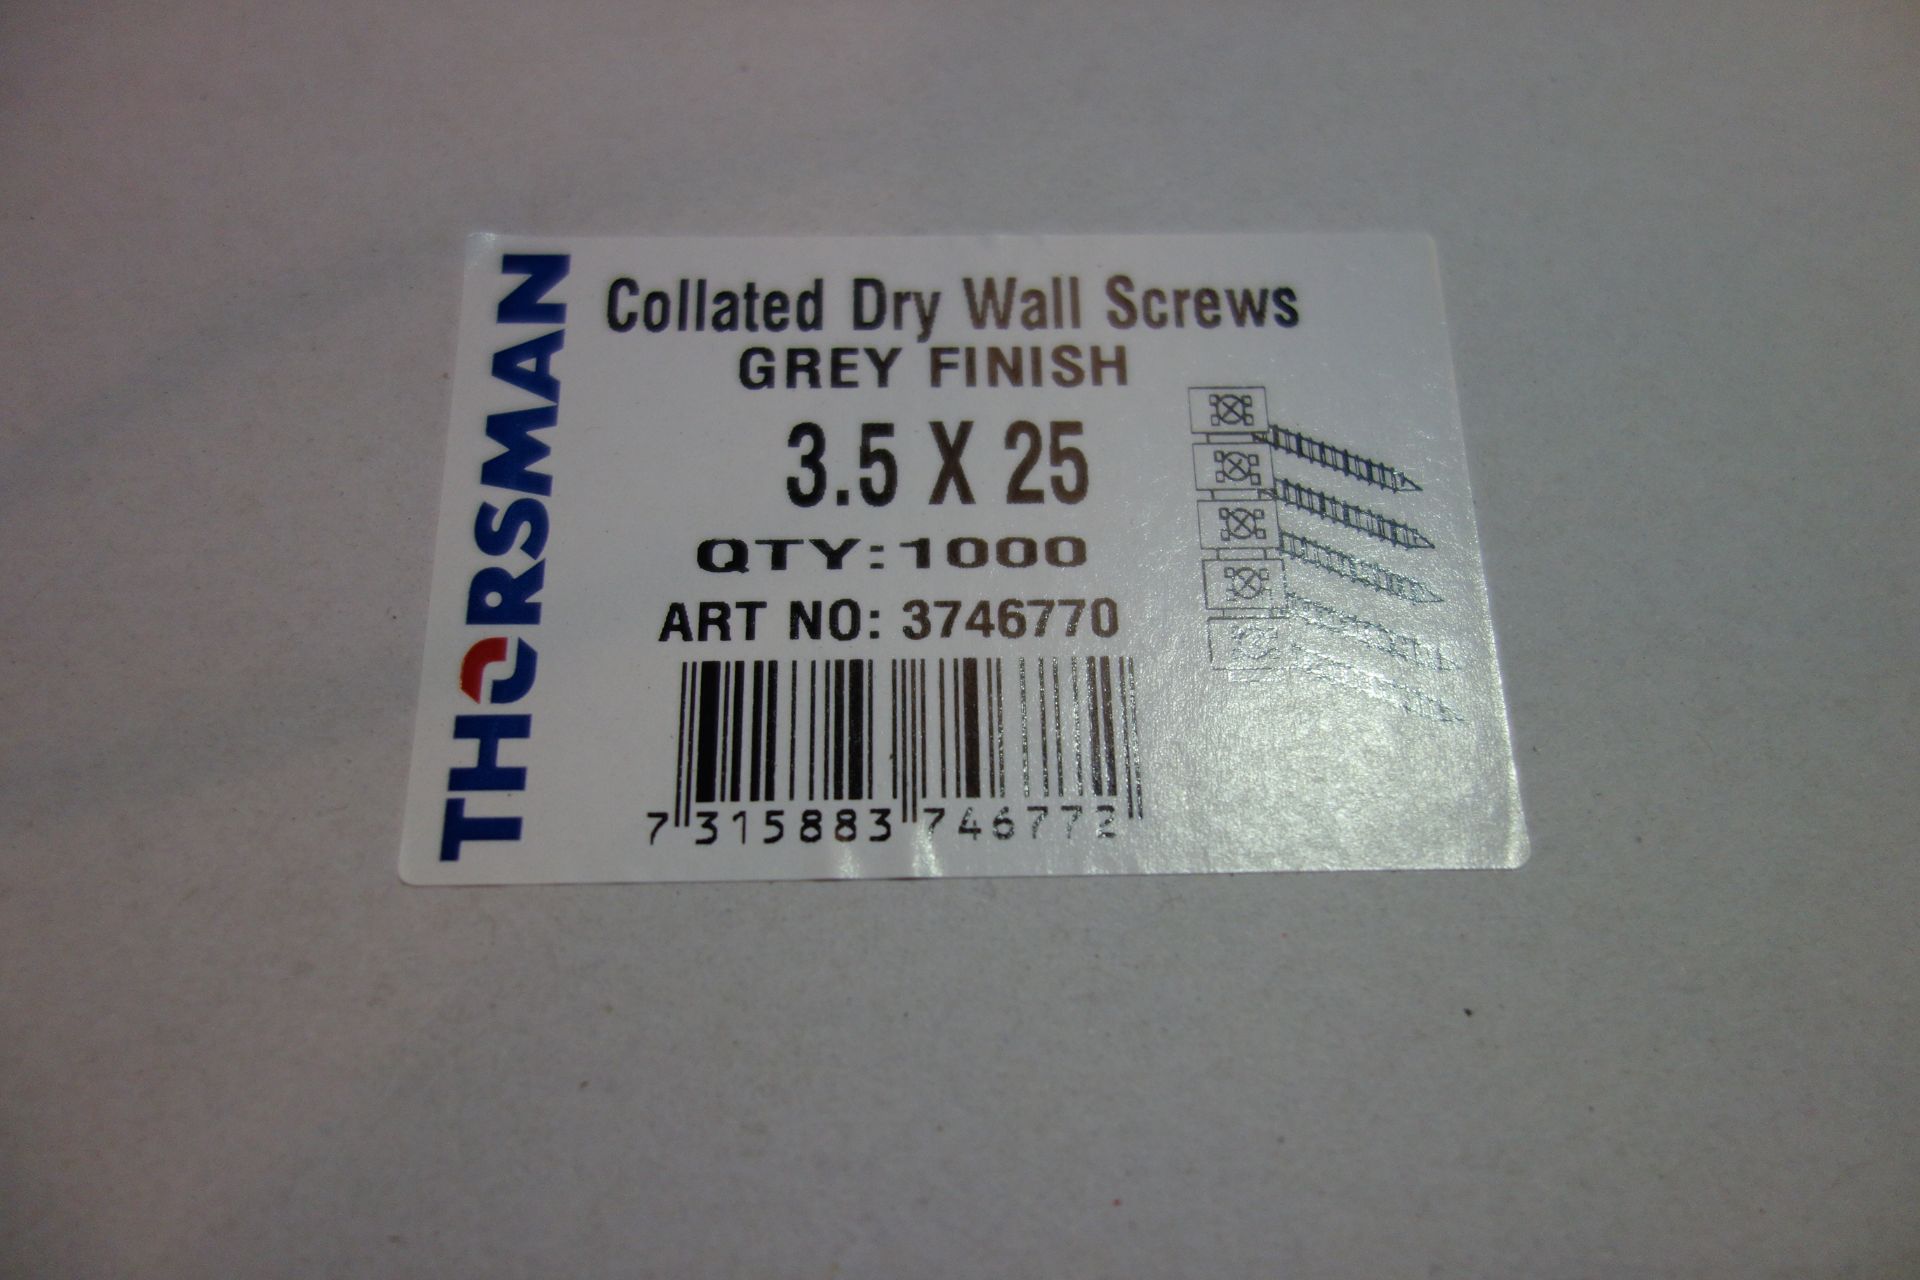 20,000 X Thorsman 3.5 X 25 Collated Dry Wall Screws Grey Finish 1000 Screws To One Box 20 Boxes In